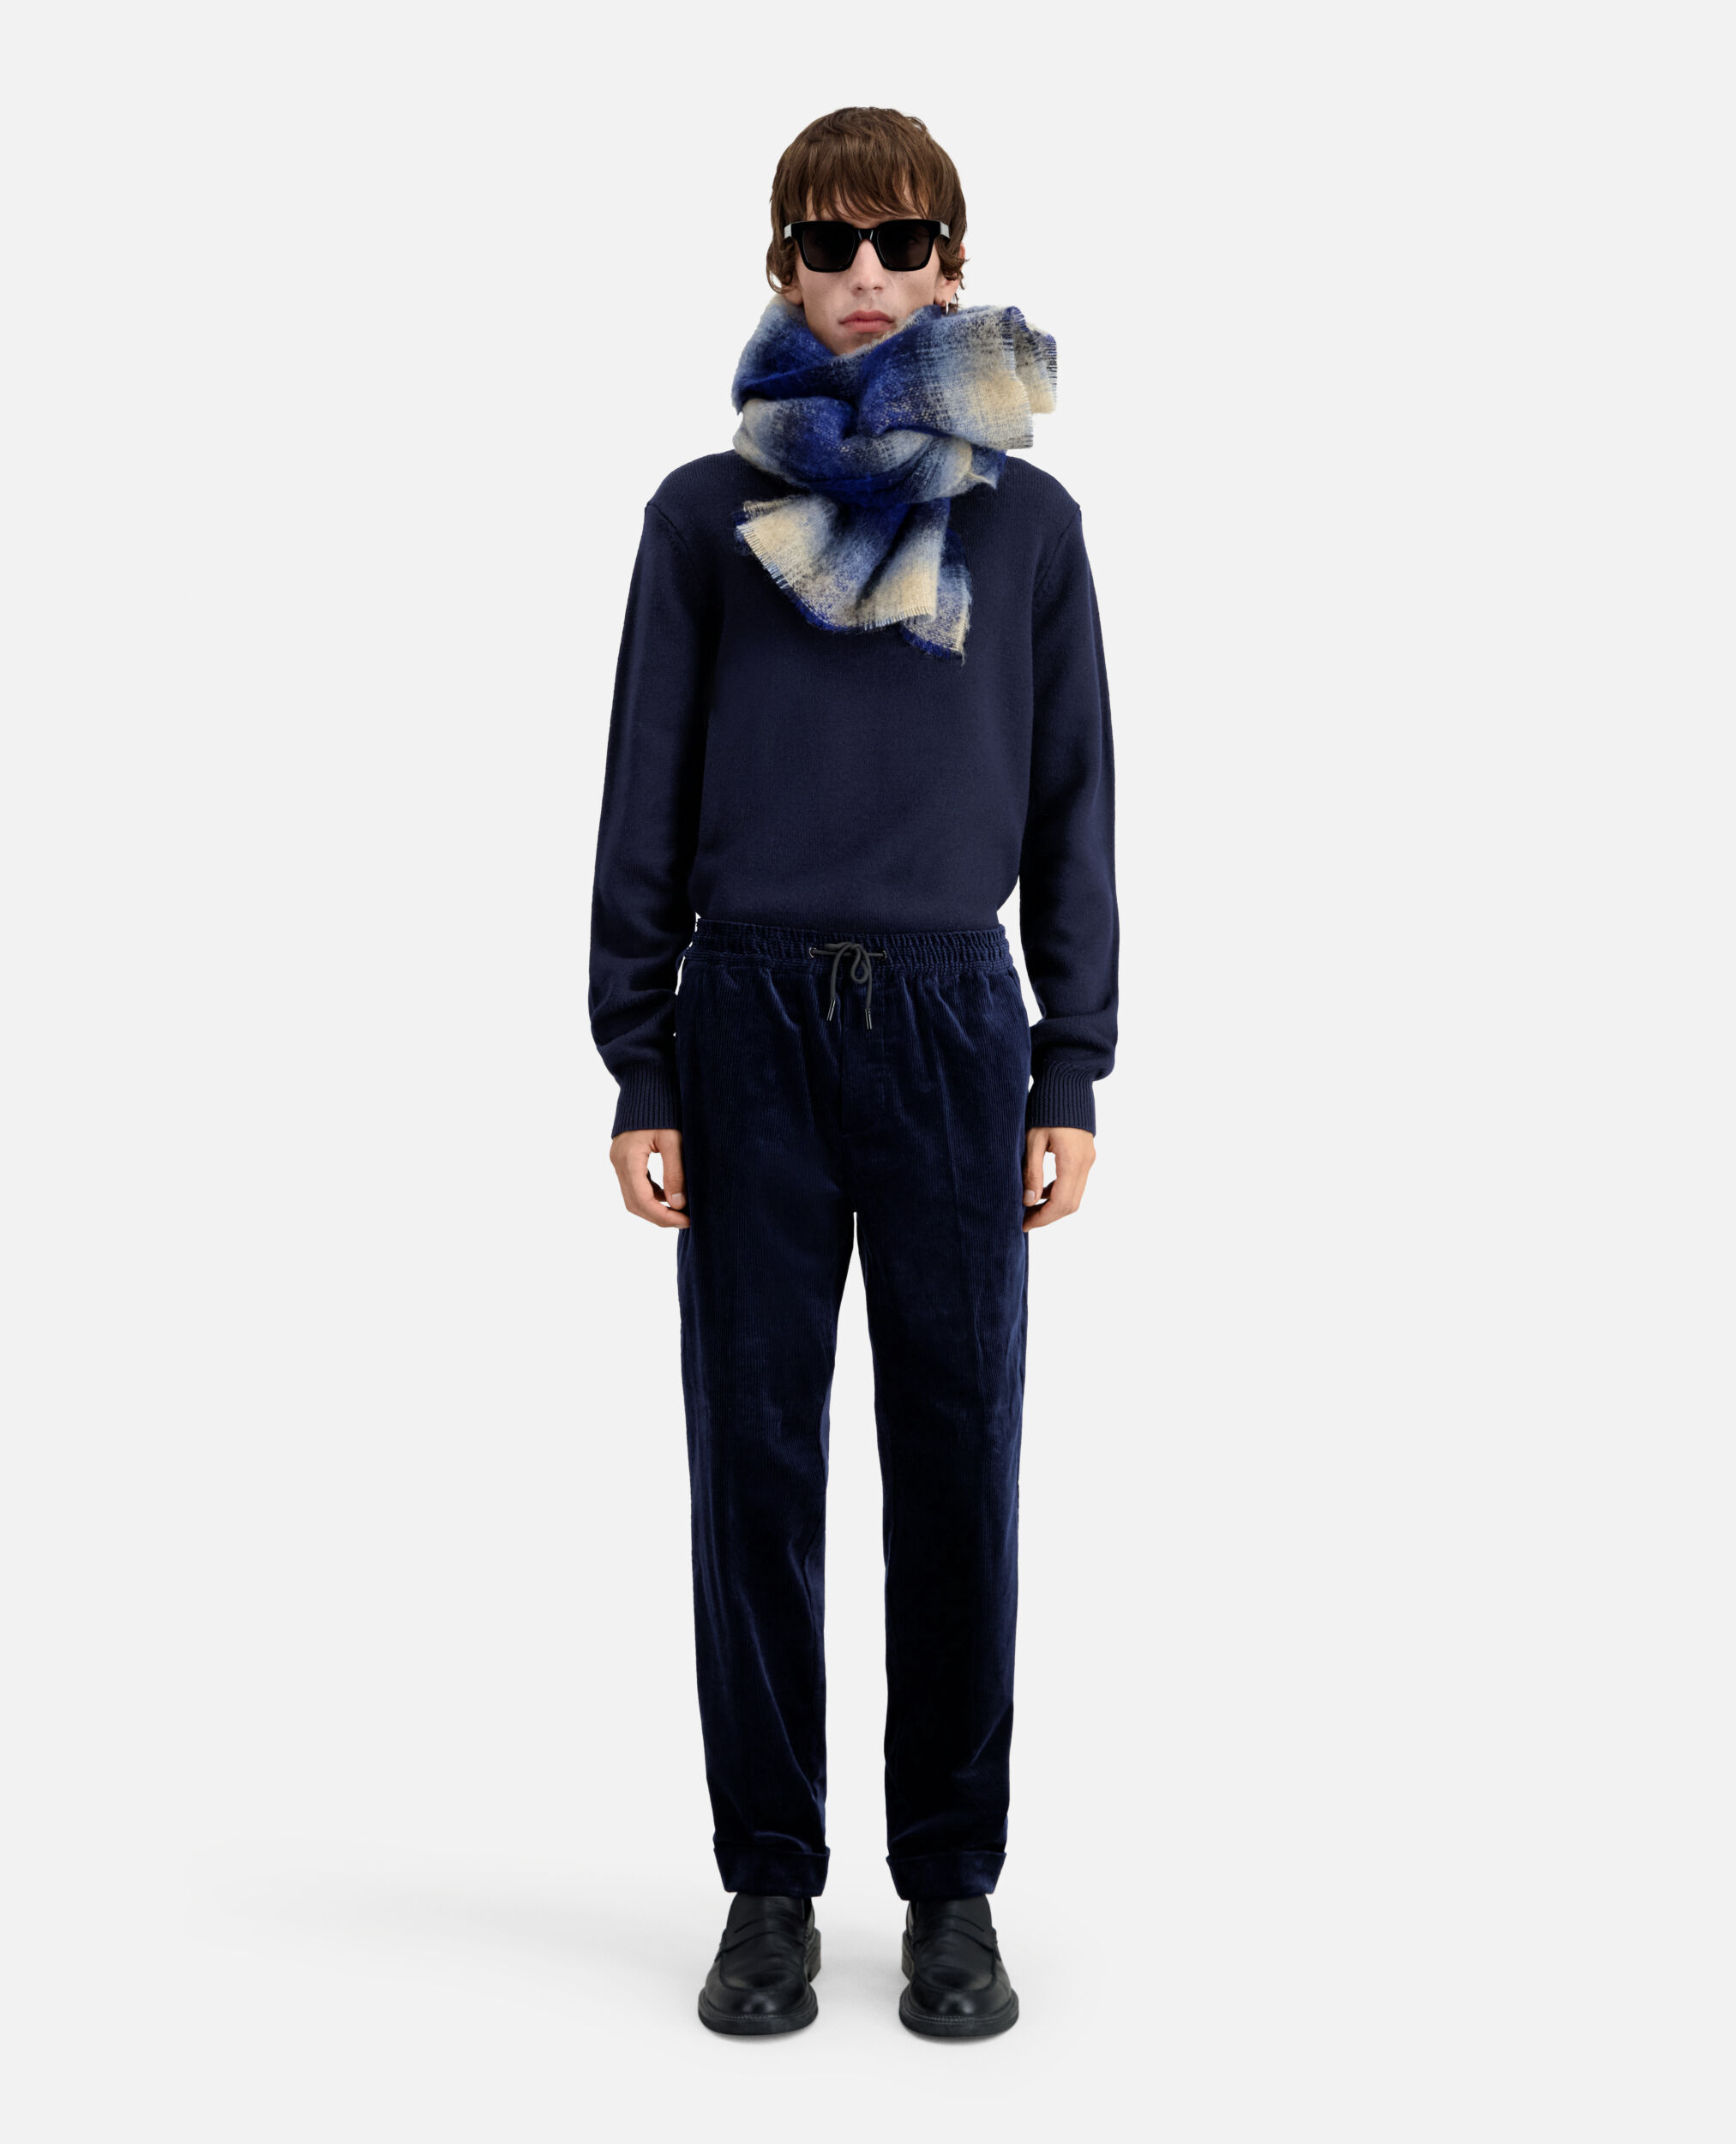 Blue wool sweater, NAVY, hi-res image number null